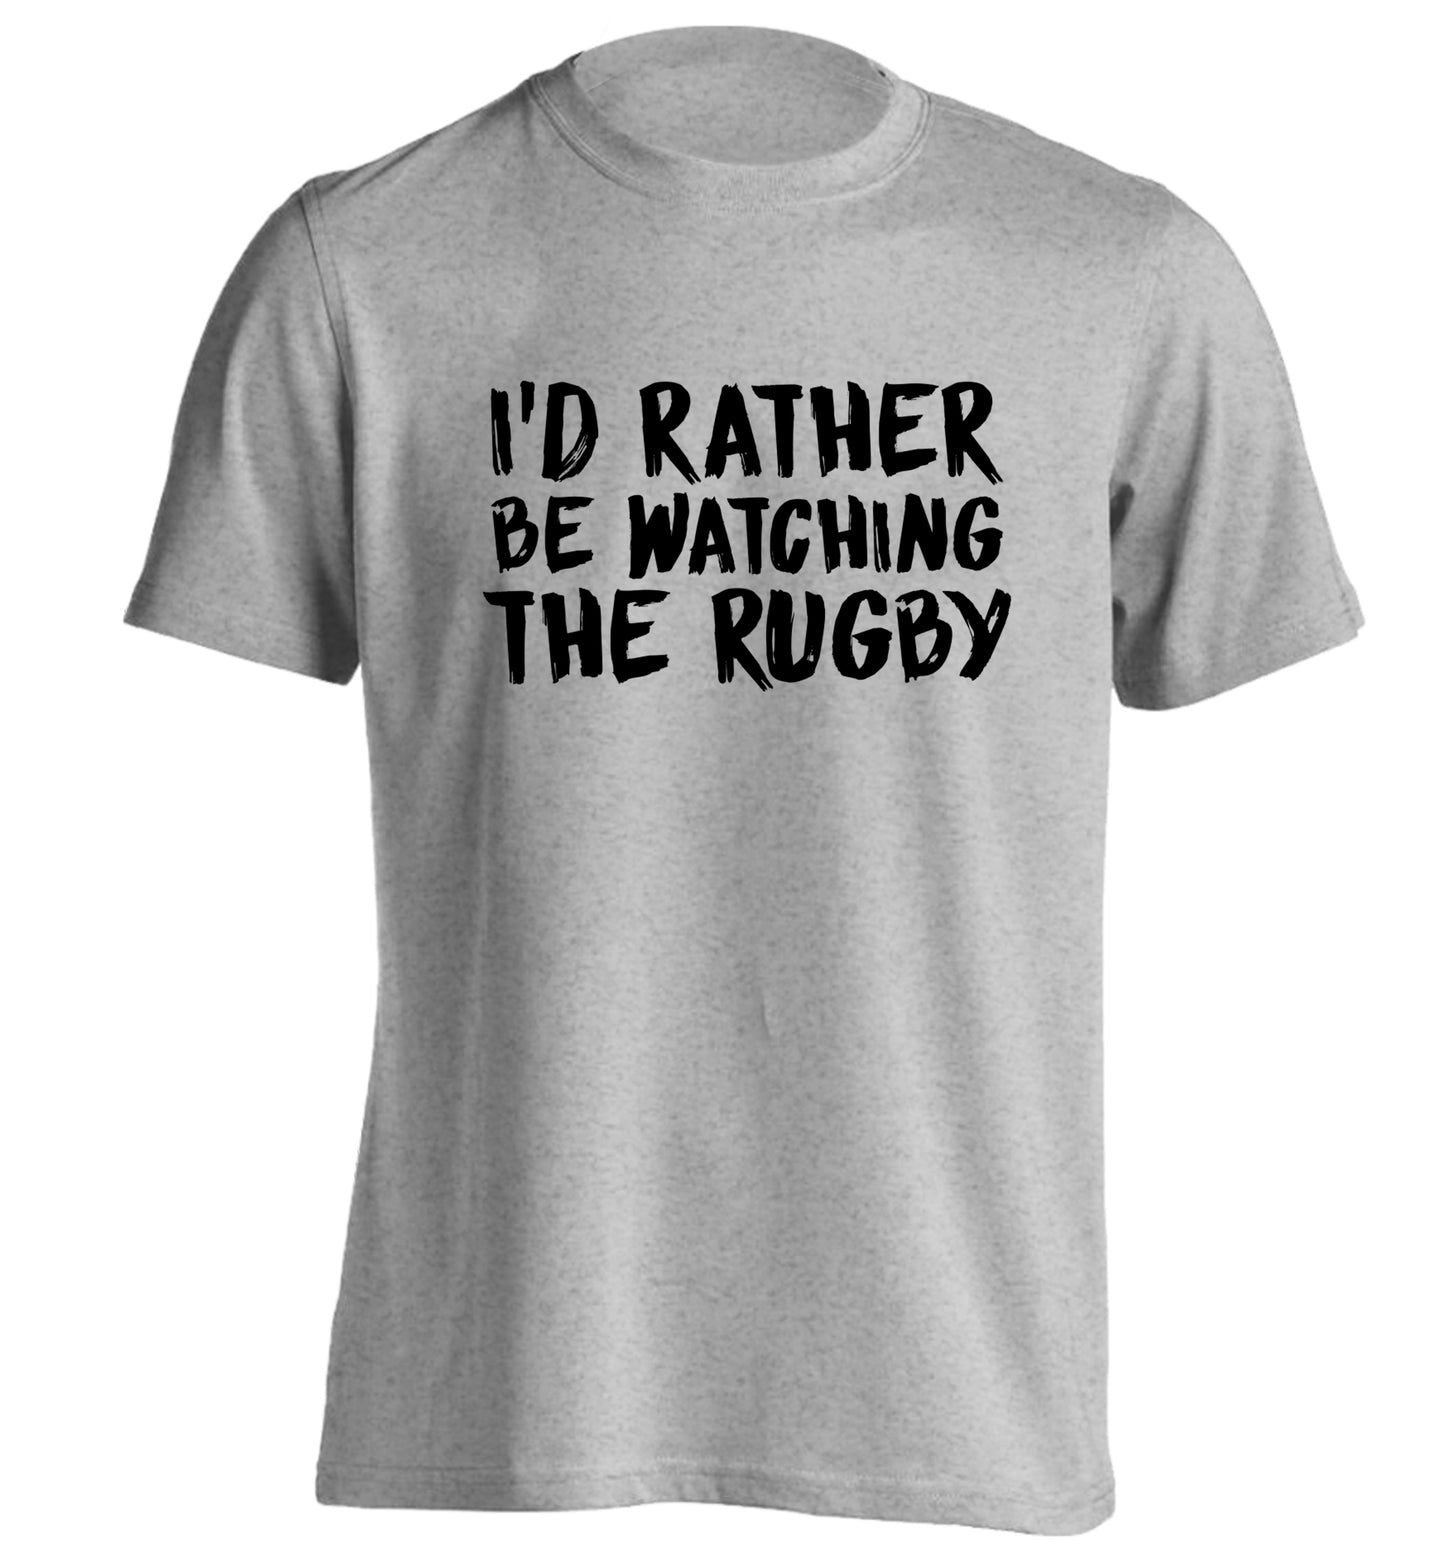 I'd rather be watching the rugby adults unisex grey Tshirt 2XL